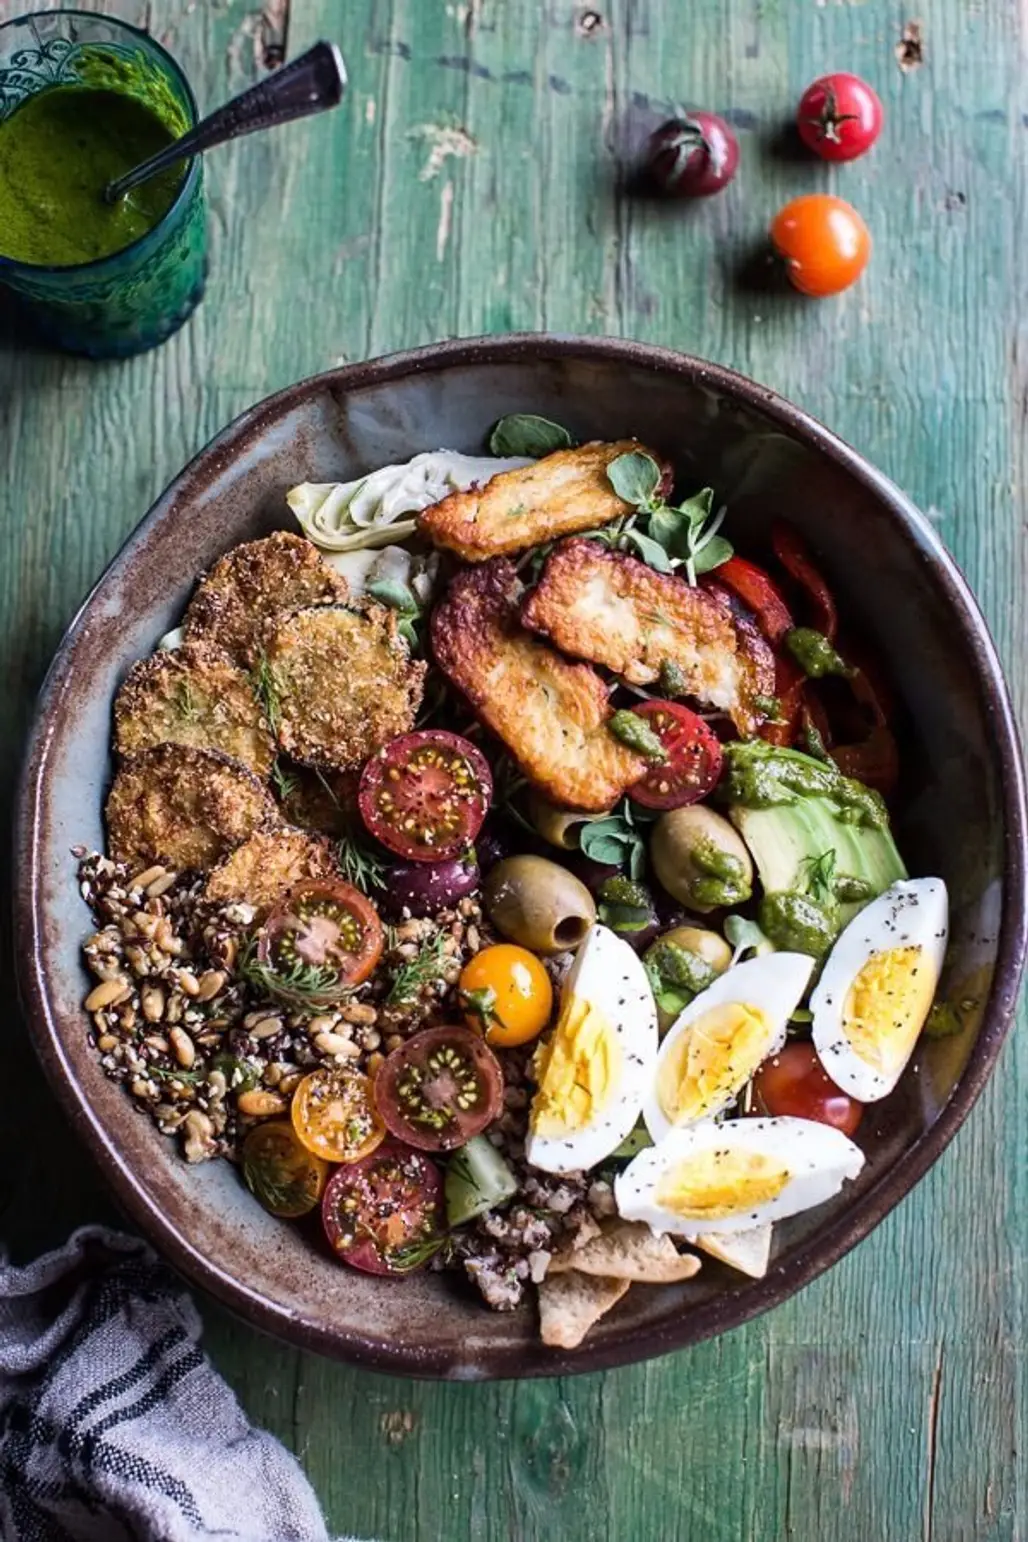 Greek Goddess Grain Bowl with “Fried” Zucchini, Toasted Seeds and Fried Halloumi